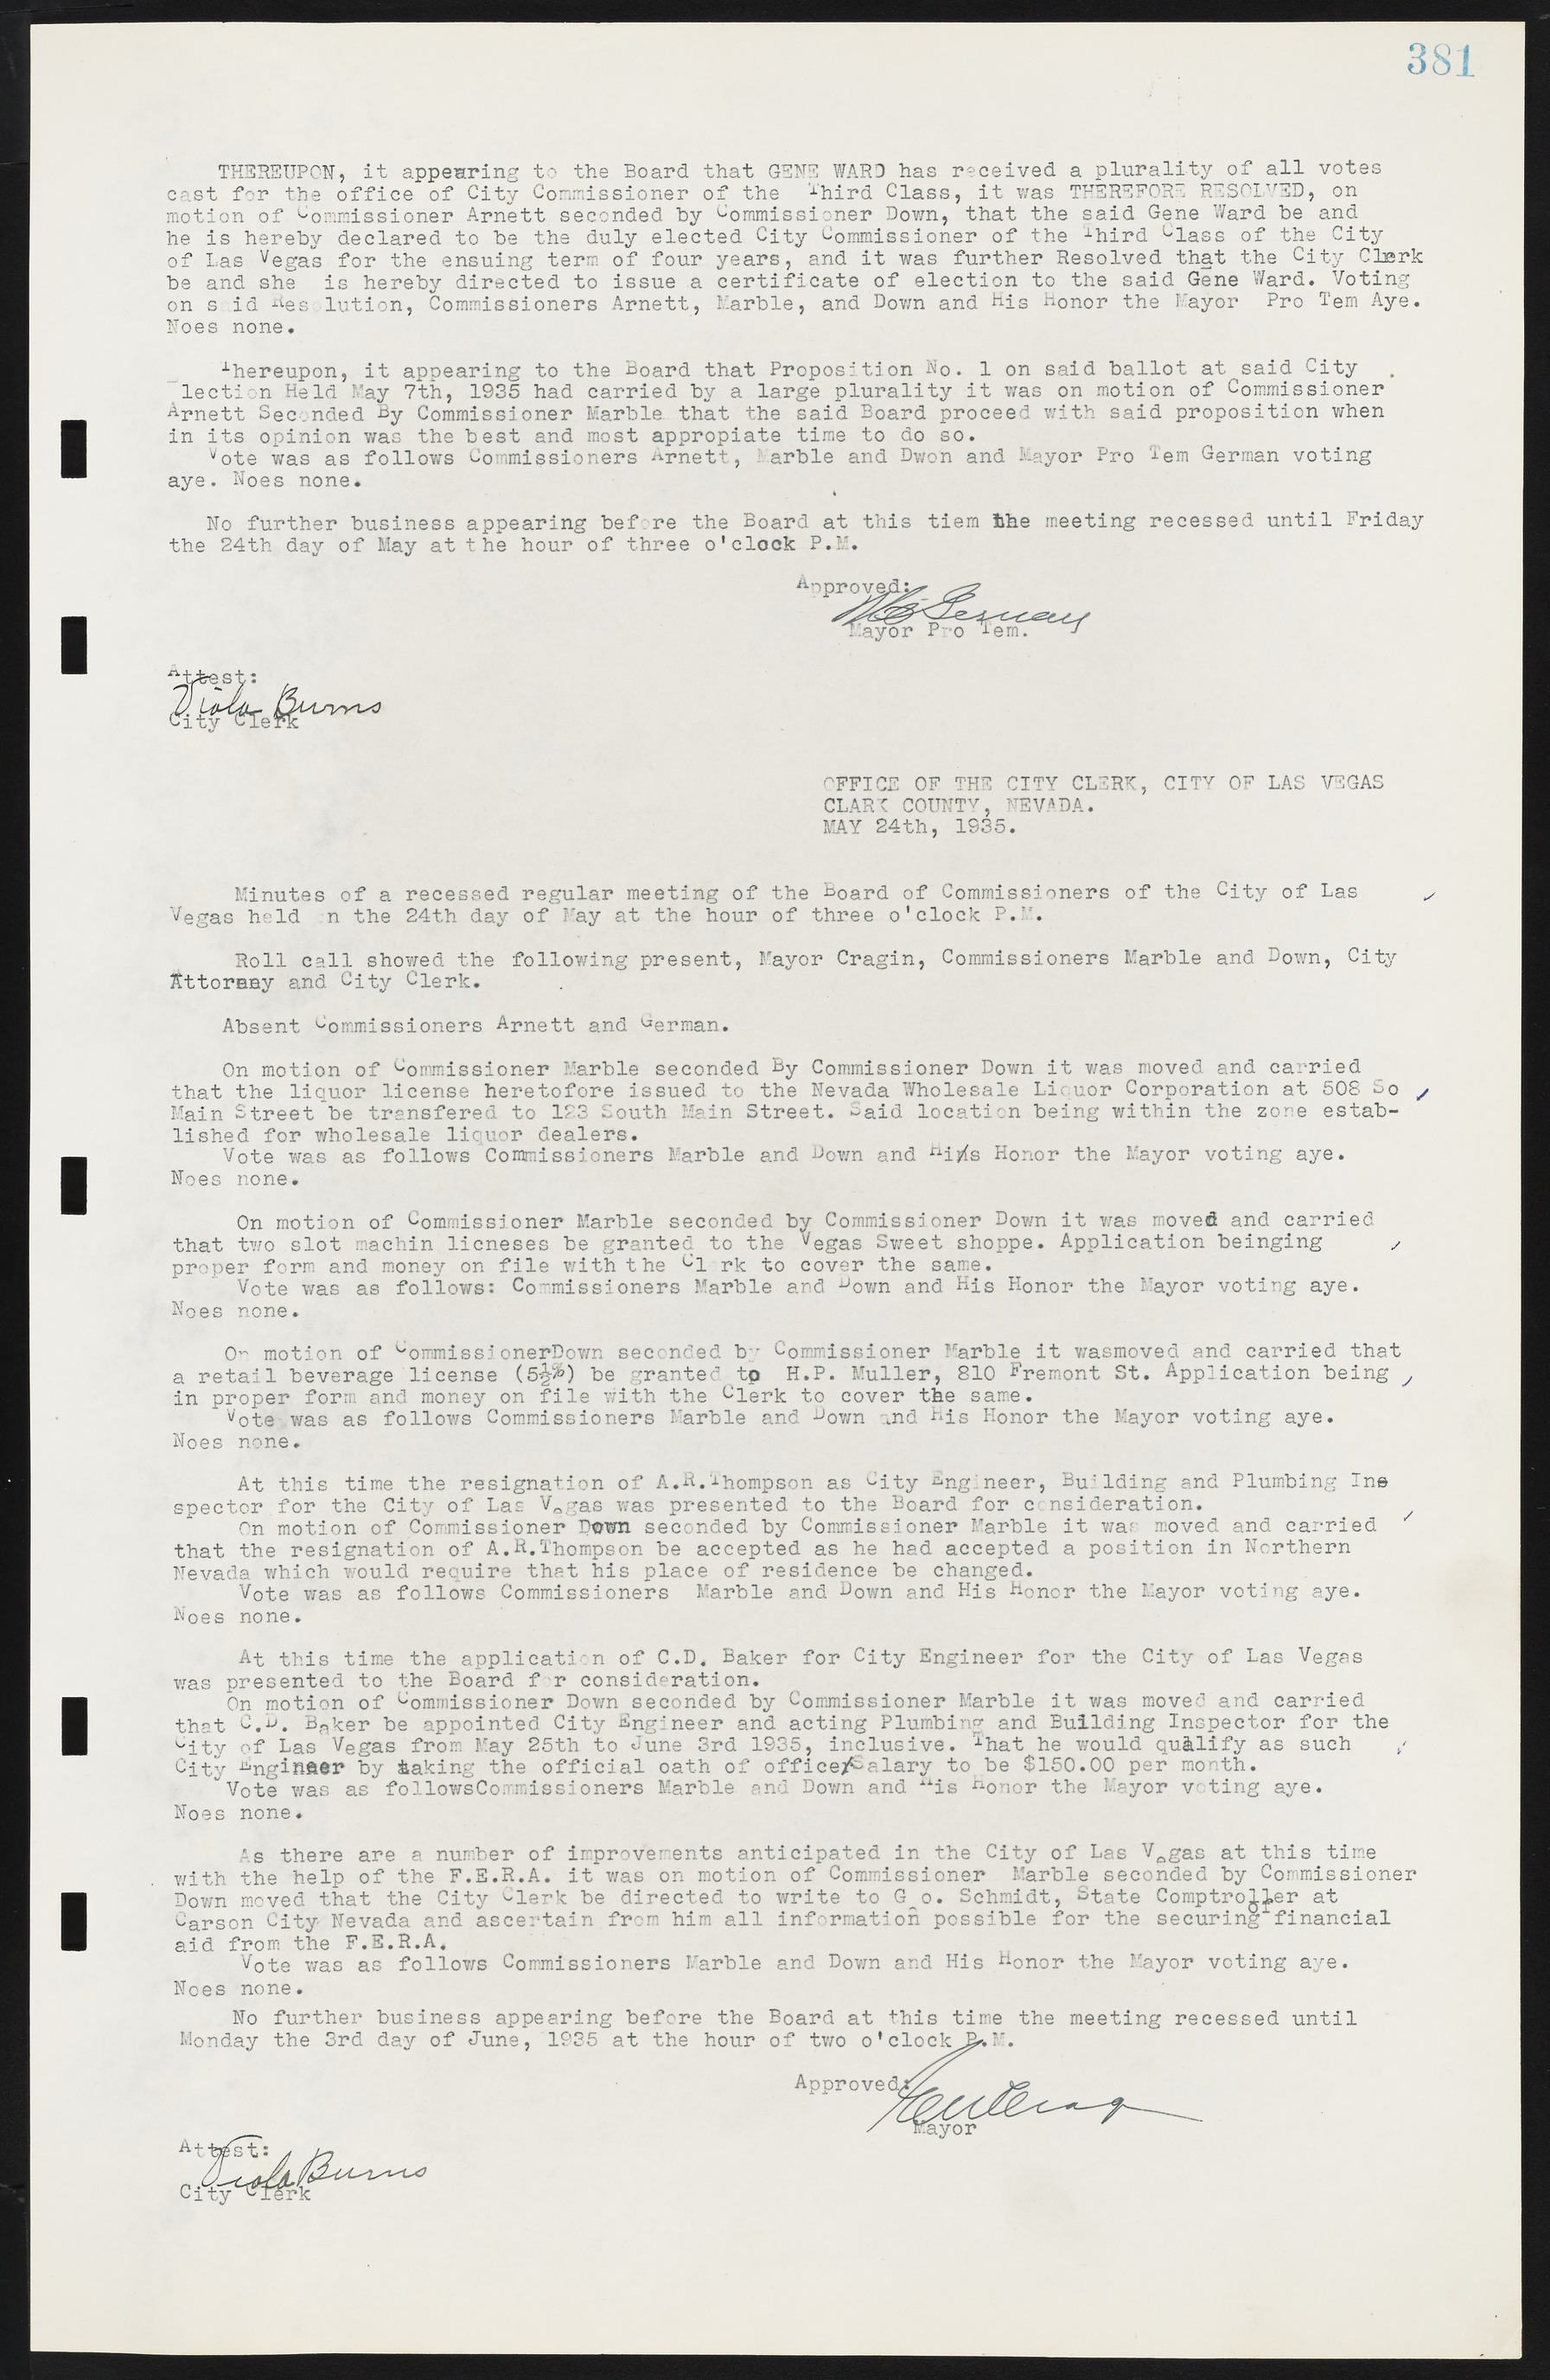 Las Vegas City Commission Minutes, May 14, 1929 to February 11, 1937, lvc000003-388